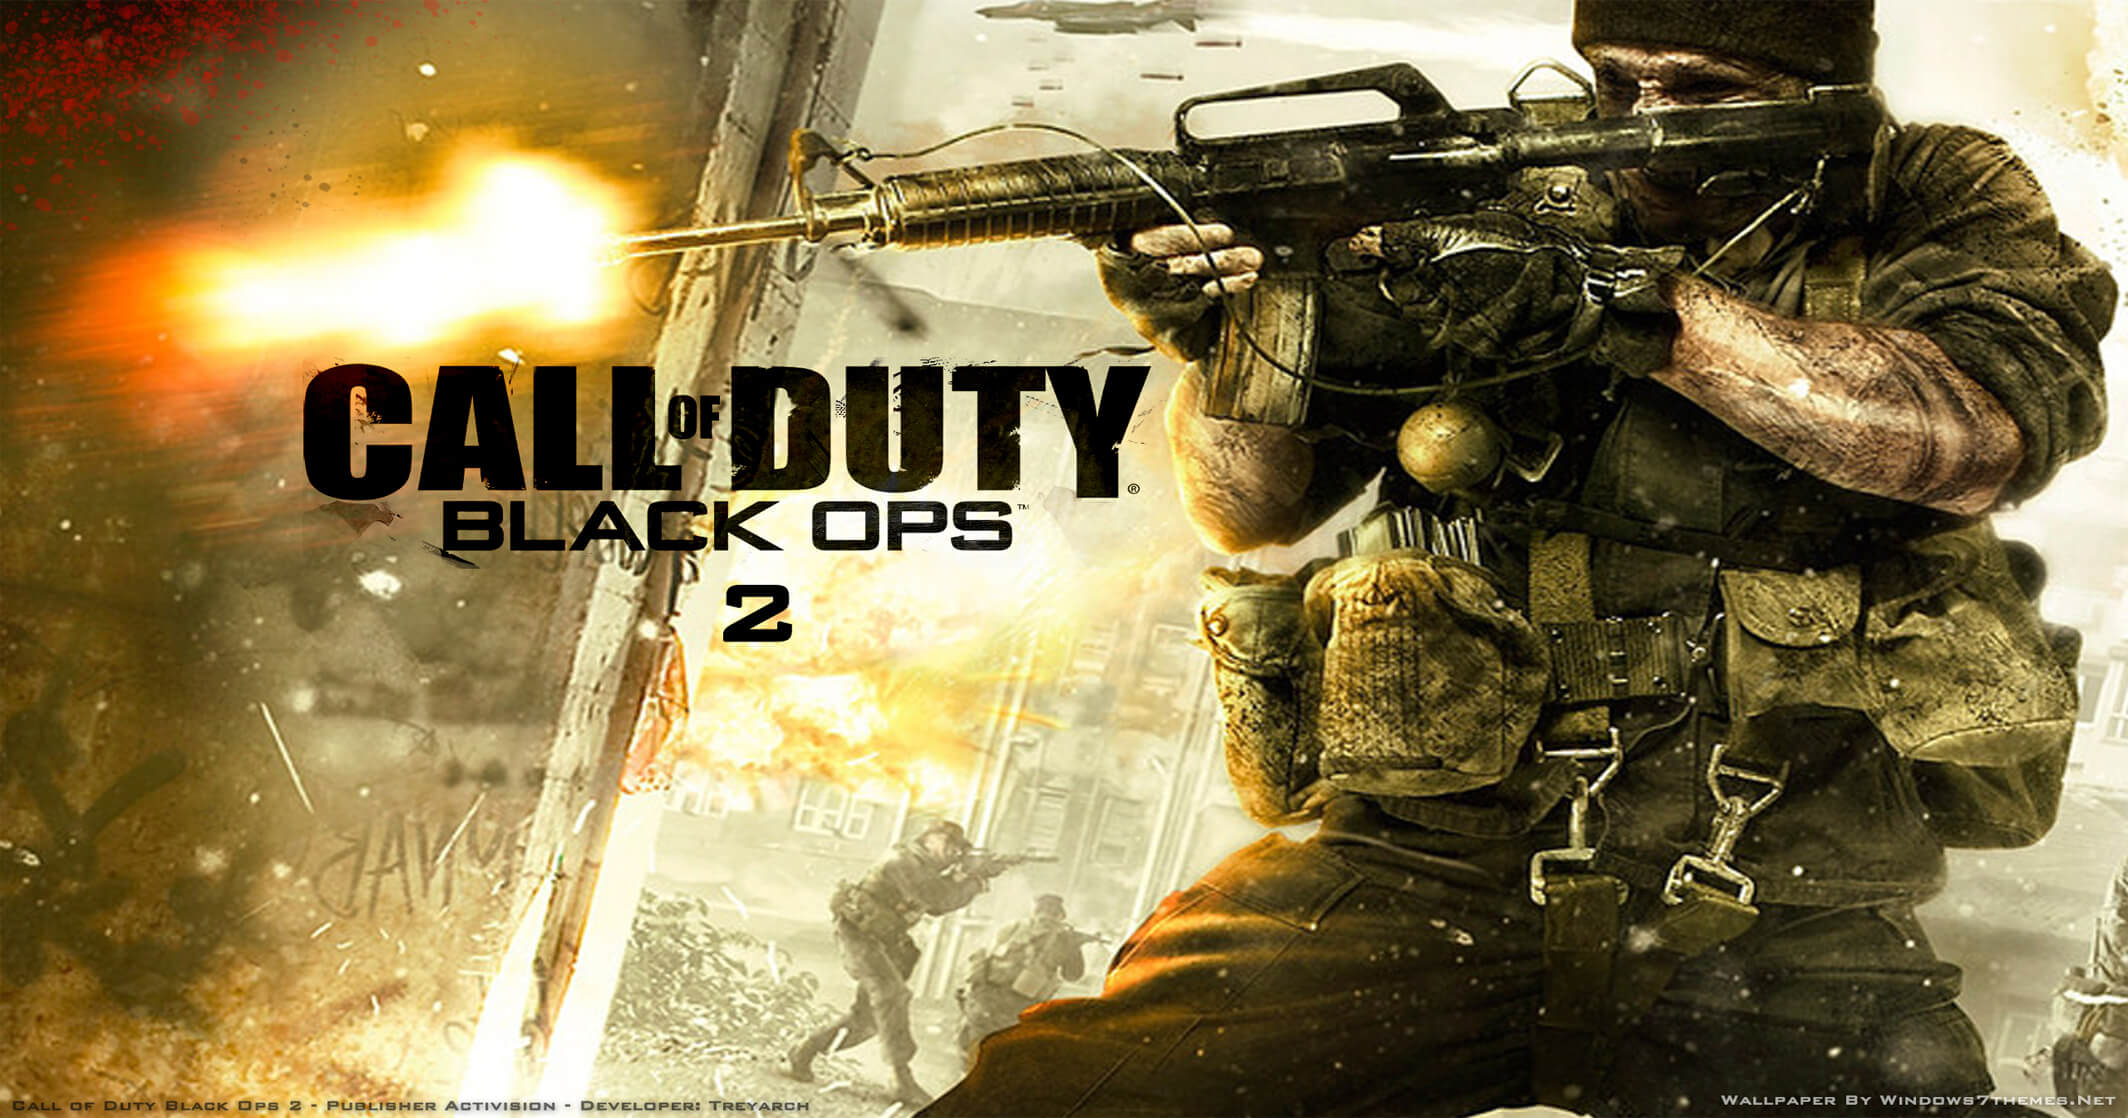 Call Of Duty: Black Ops 2 PC Download (ALL DLC's)